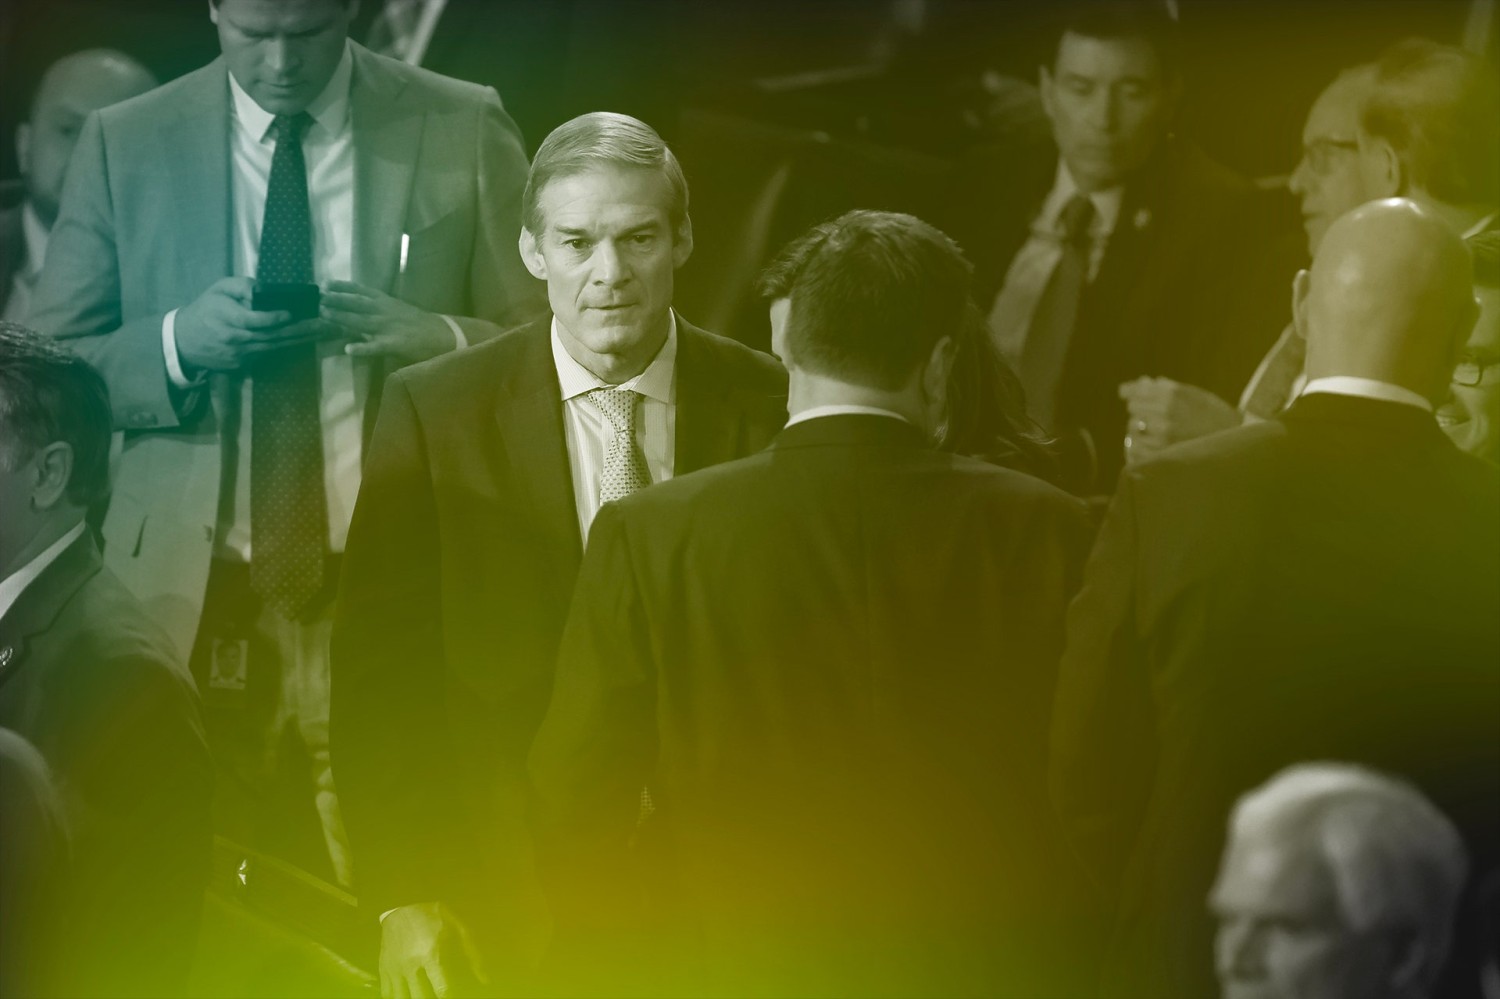 If Jim Jordan were to be elected as Speaker, it would signal that the Republican Party had formally accepted its role as a mere appendage to an insurrectionary right-wing movement.Photograph by Chip Somodevilla / Getty